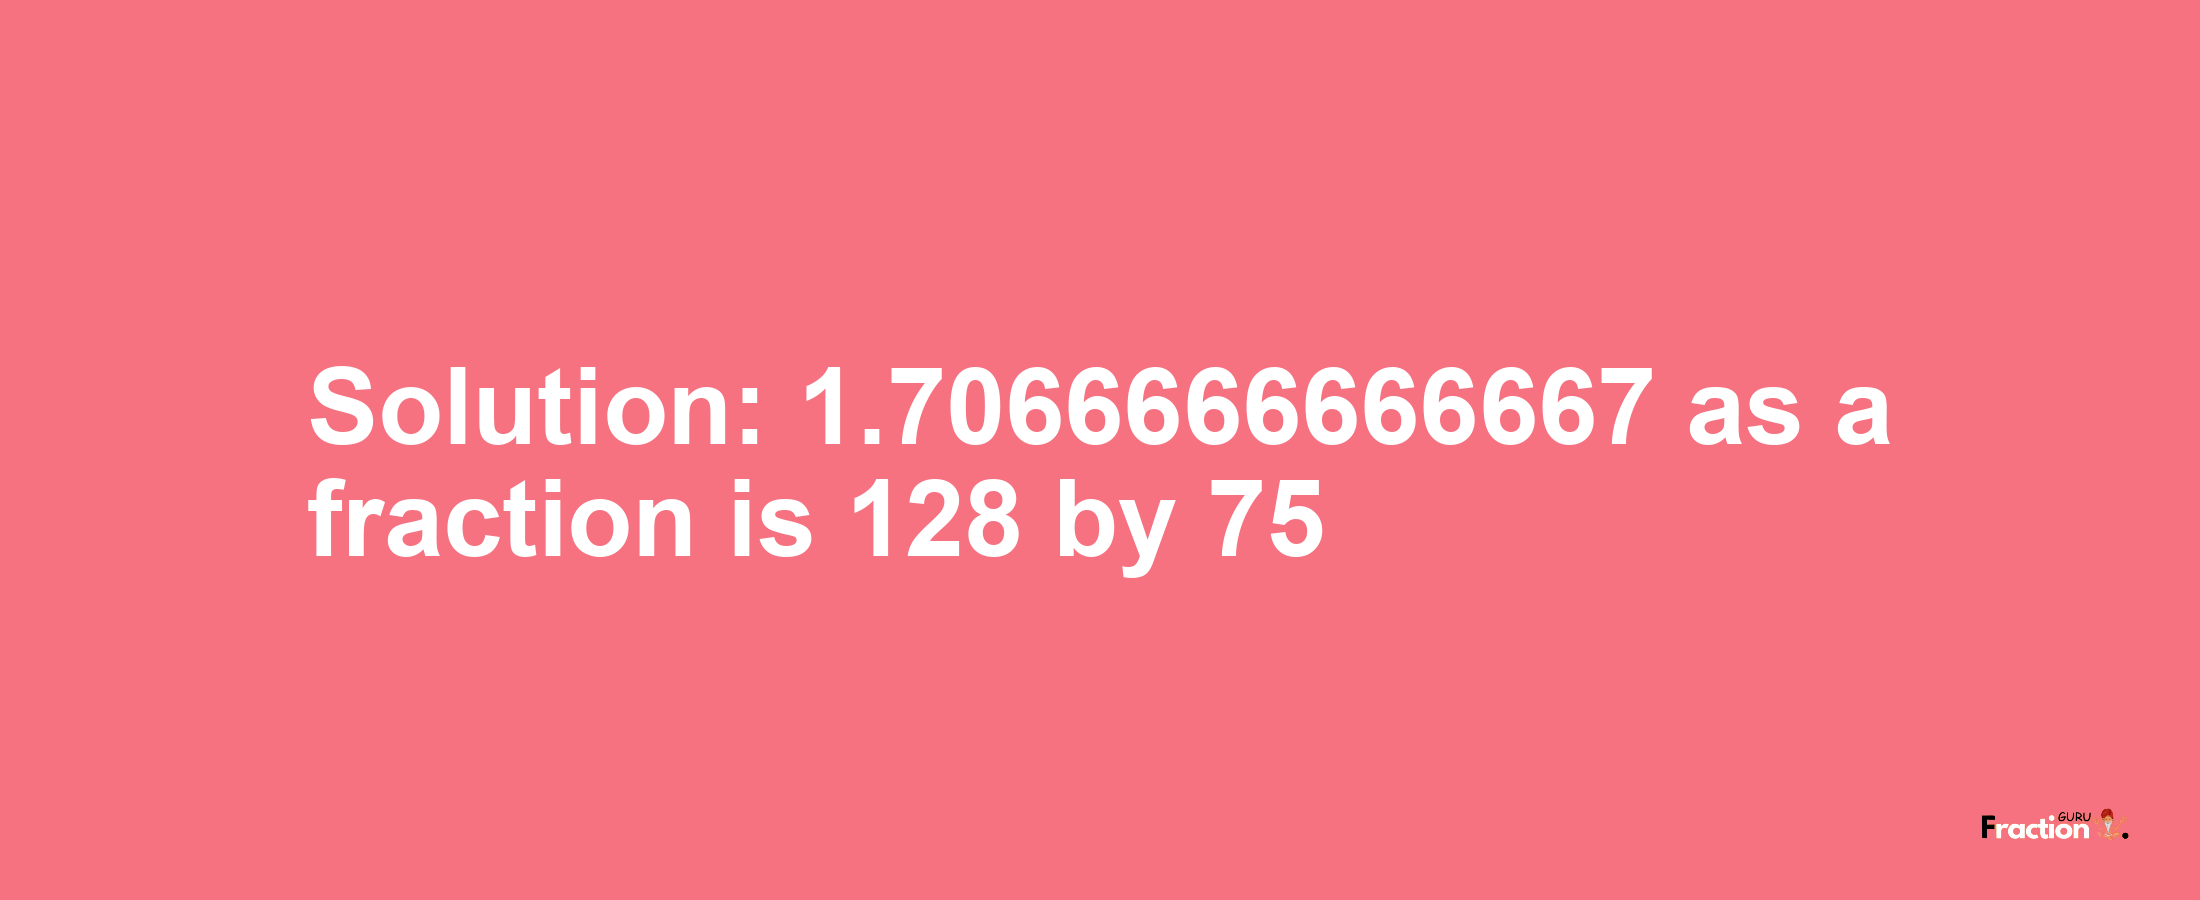 Solution:1.7066666666667 as a fraction is 128/75